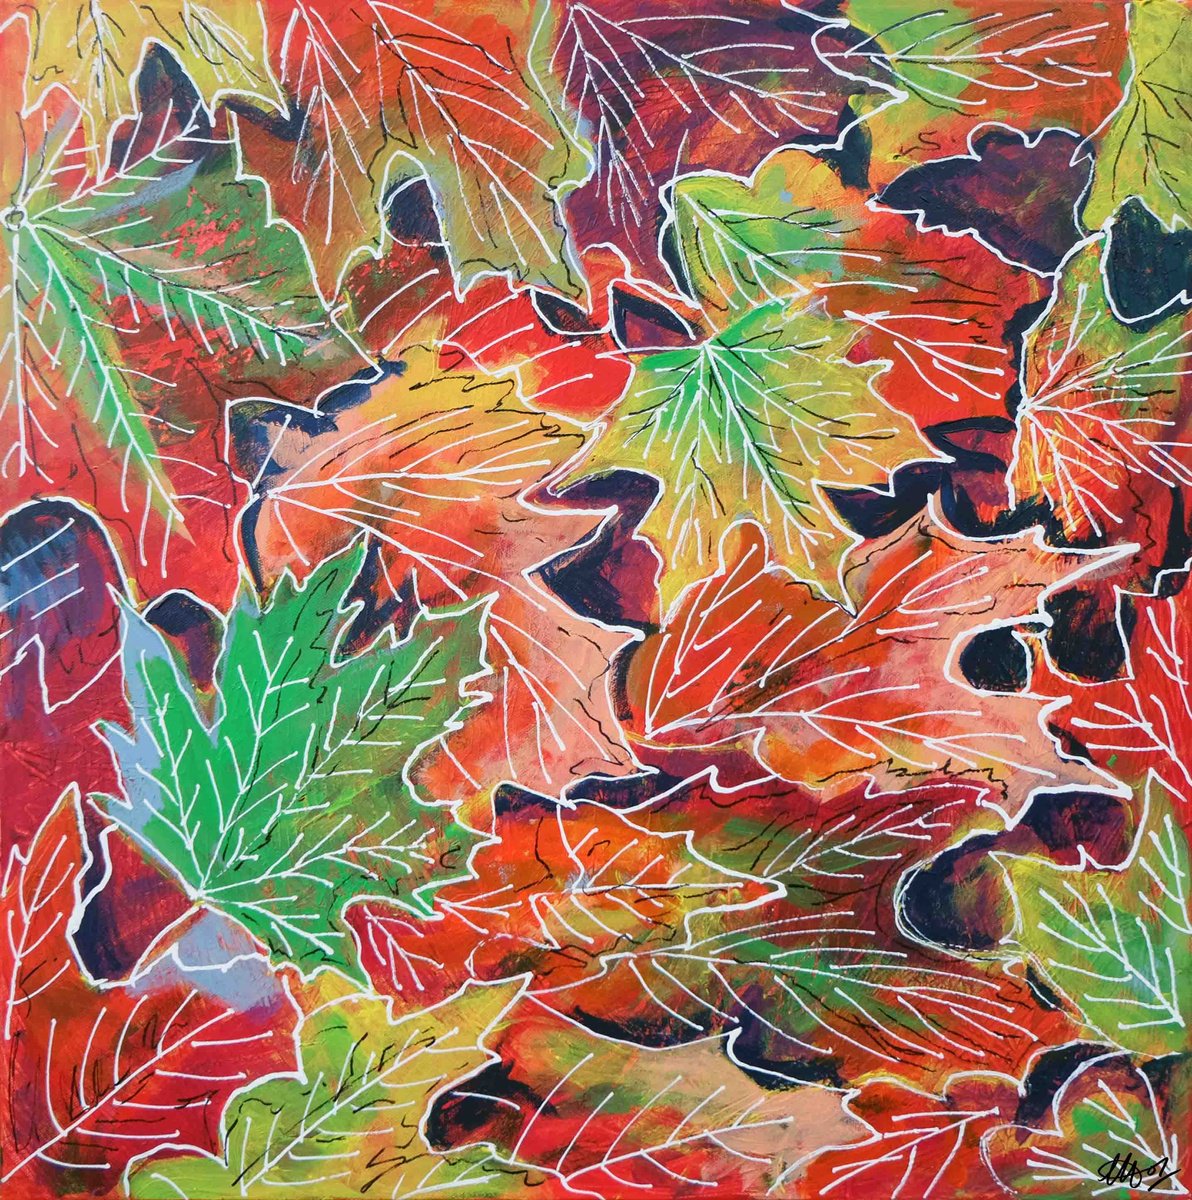 October’s Carpet by Laura Hol